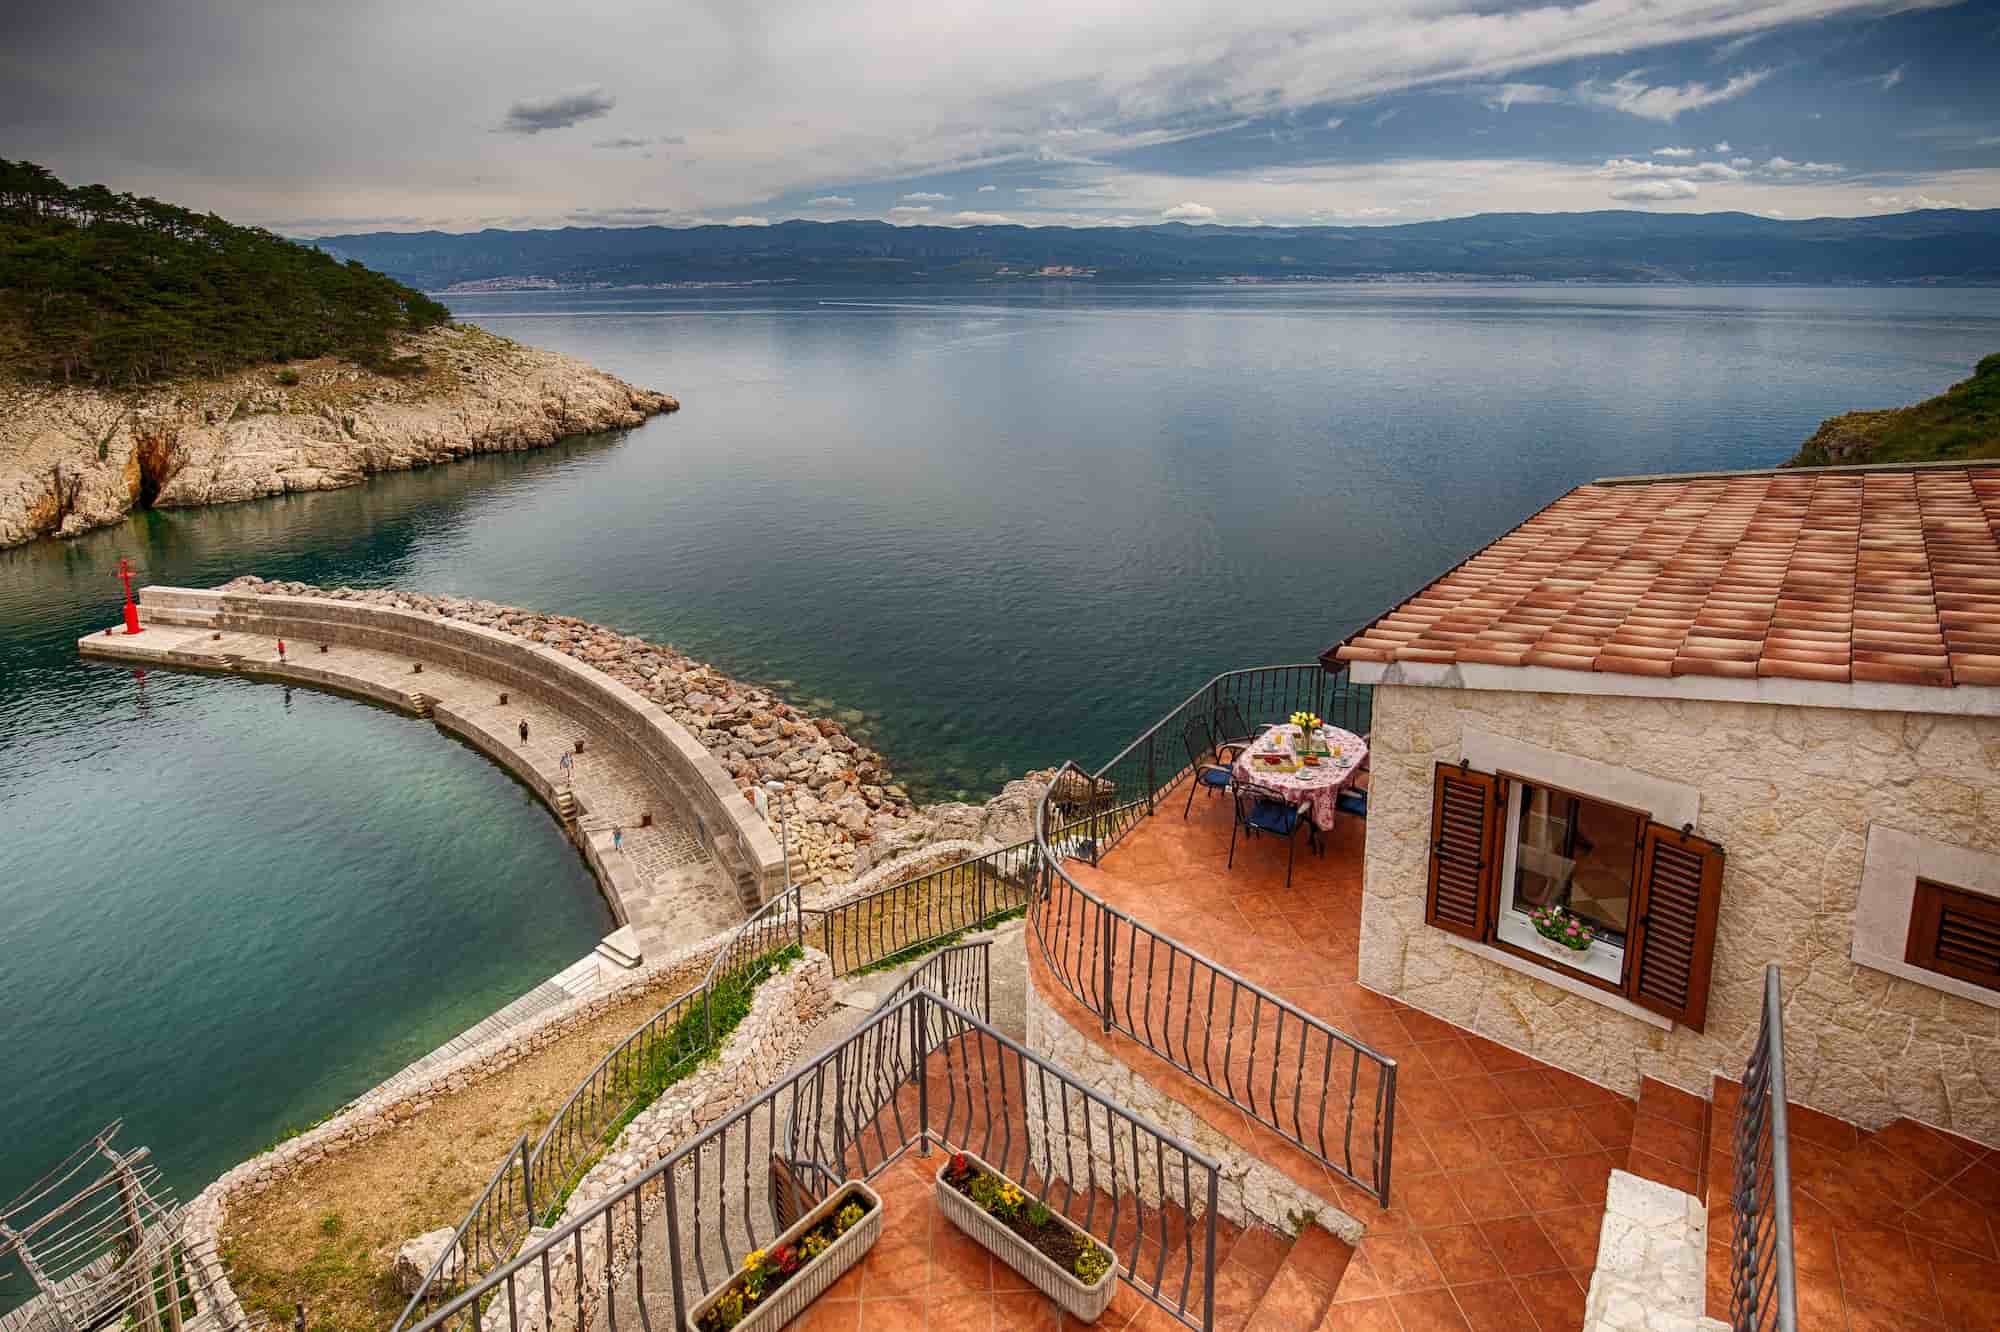 Villetta with terrace over the sea, 50 meters from the beach